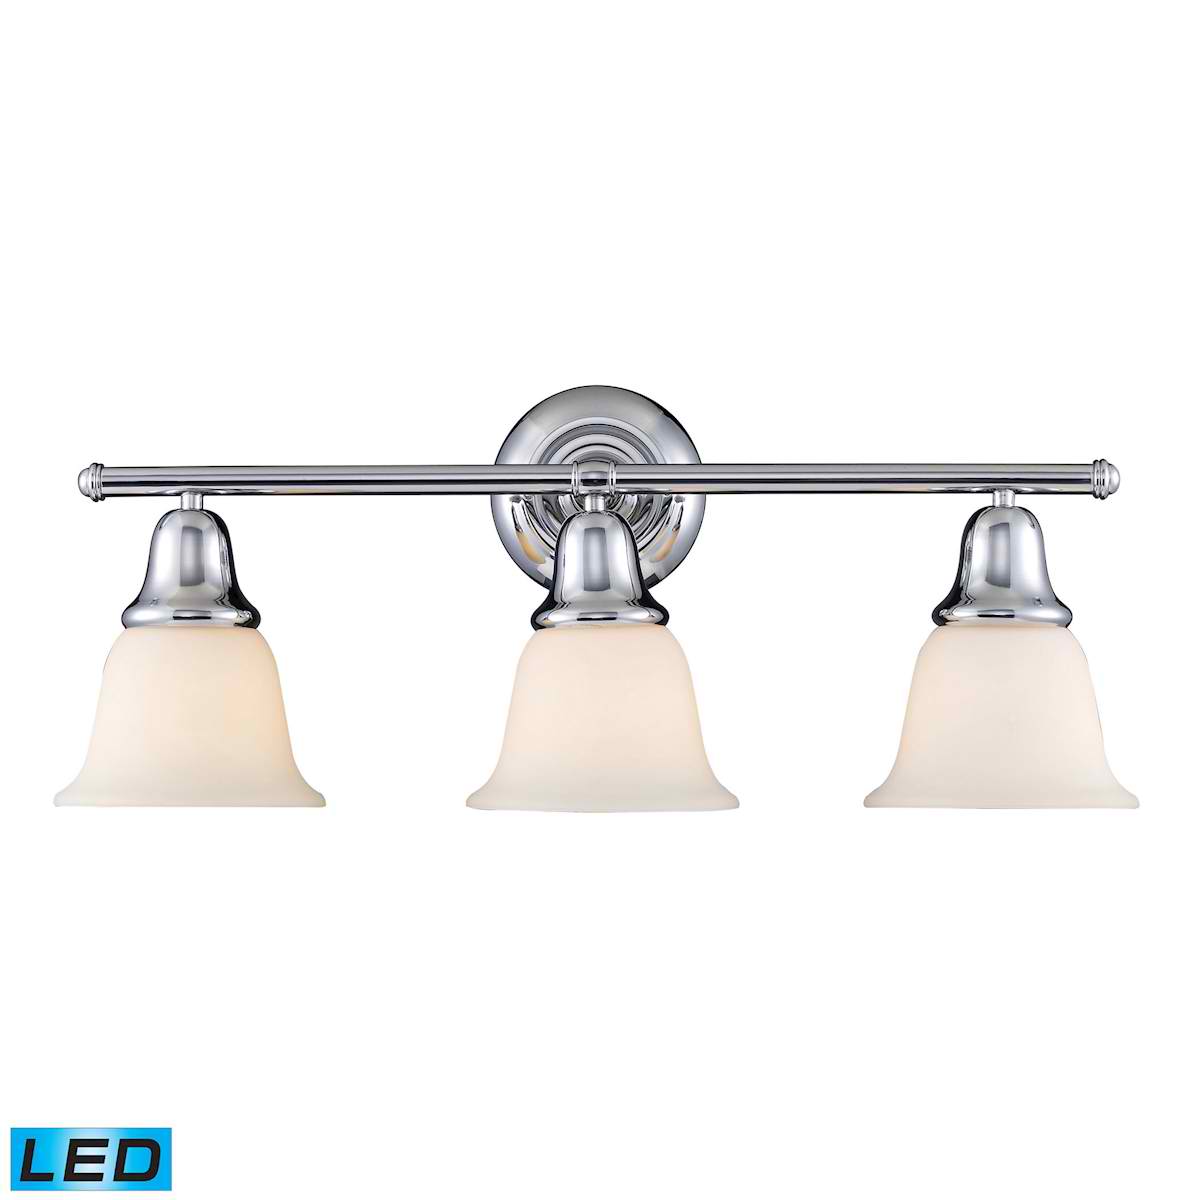 Berwick 3-Light Vanity in Polished Chrome - LED, 800 Lumens (2400 Lumens Total) with Full Scale Dimm